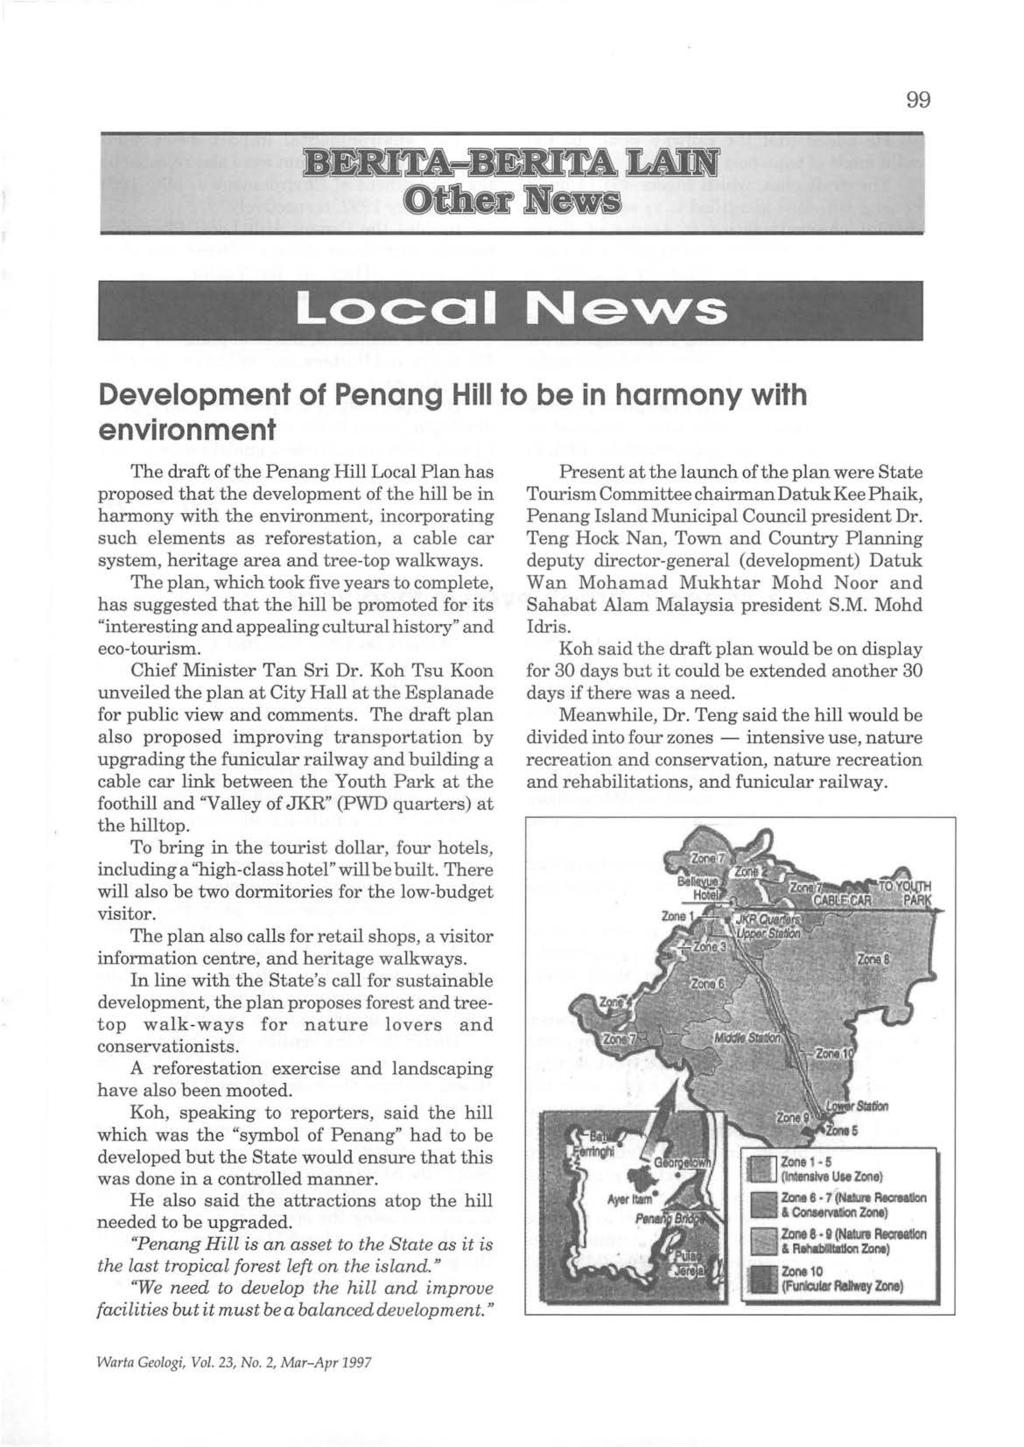 99 Development of Penang Hill to be in harmony with environment The draft of the Penang Hill Local Plan has proposed that the development of the hill be in harmony with the environment, incorporating